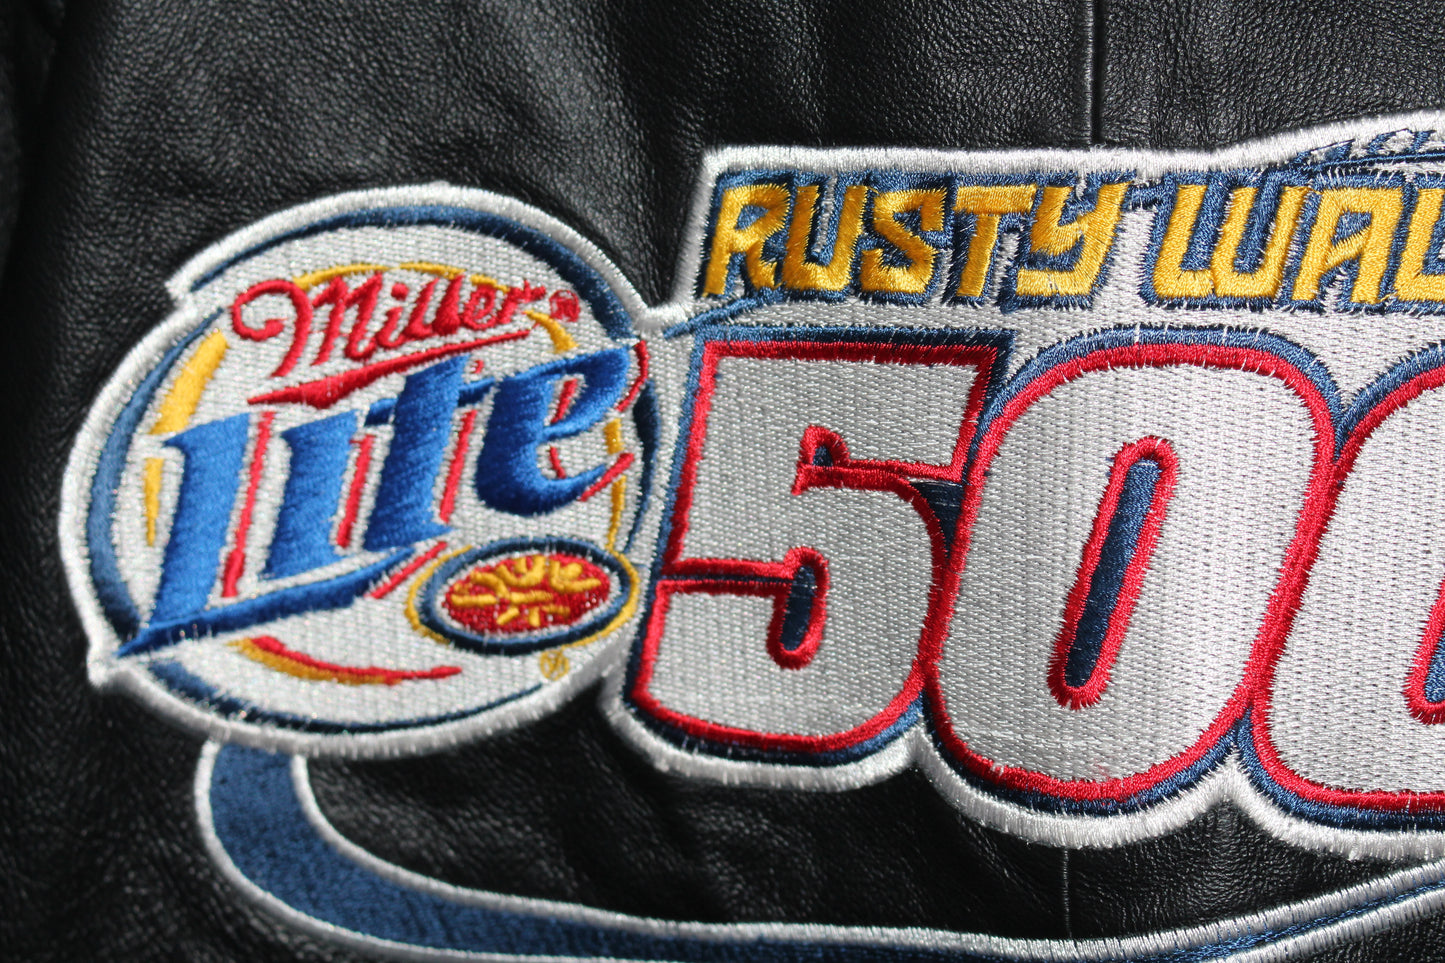 Miller Lite Racing NASCAR Rusty Wallace #2 Leather Jacket (L)